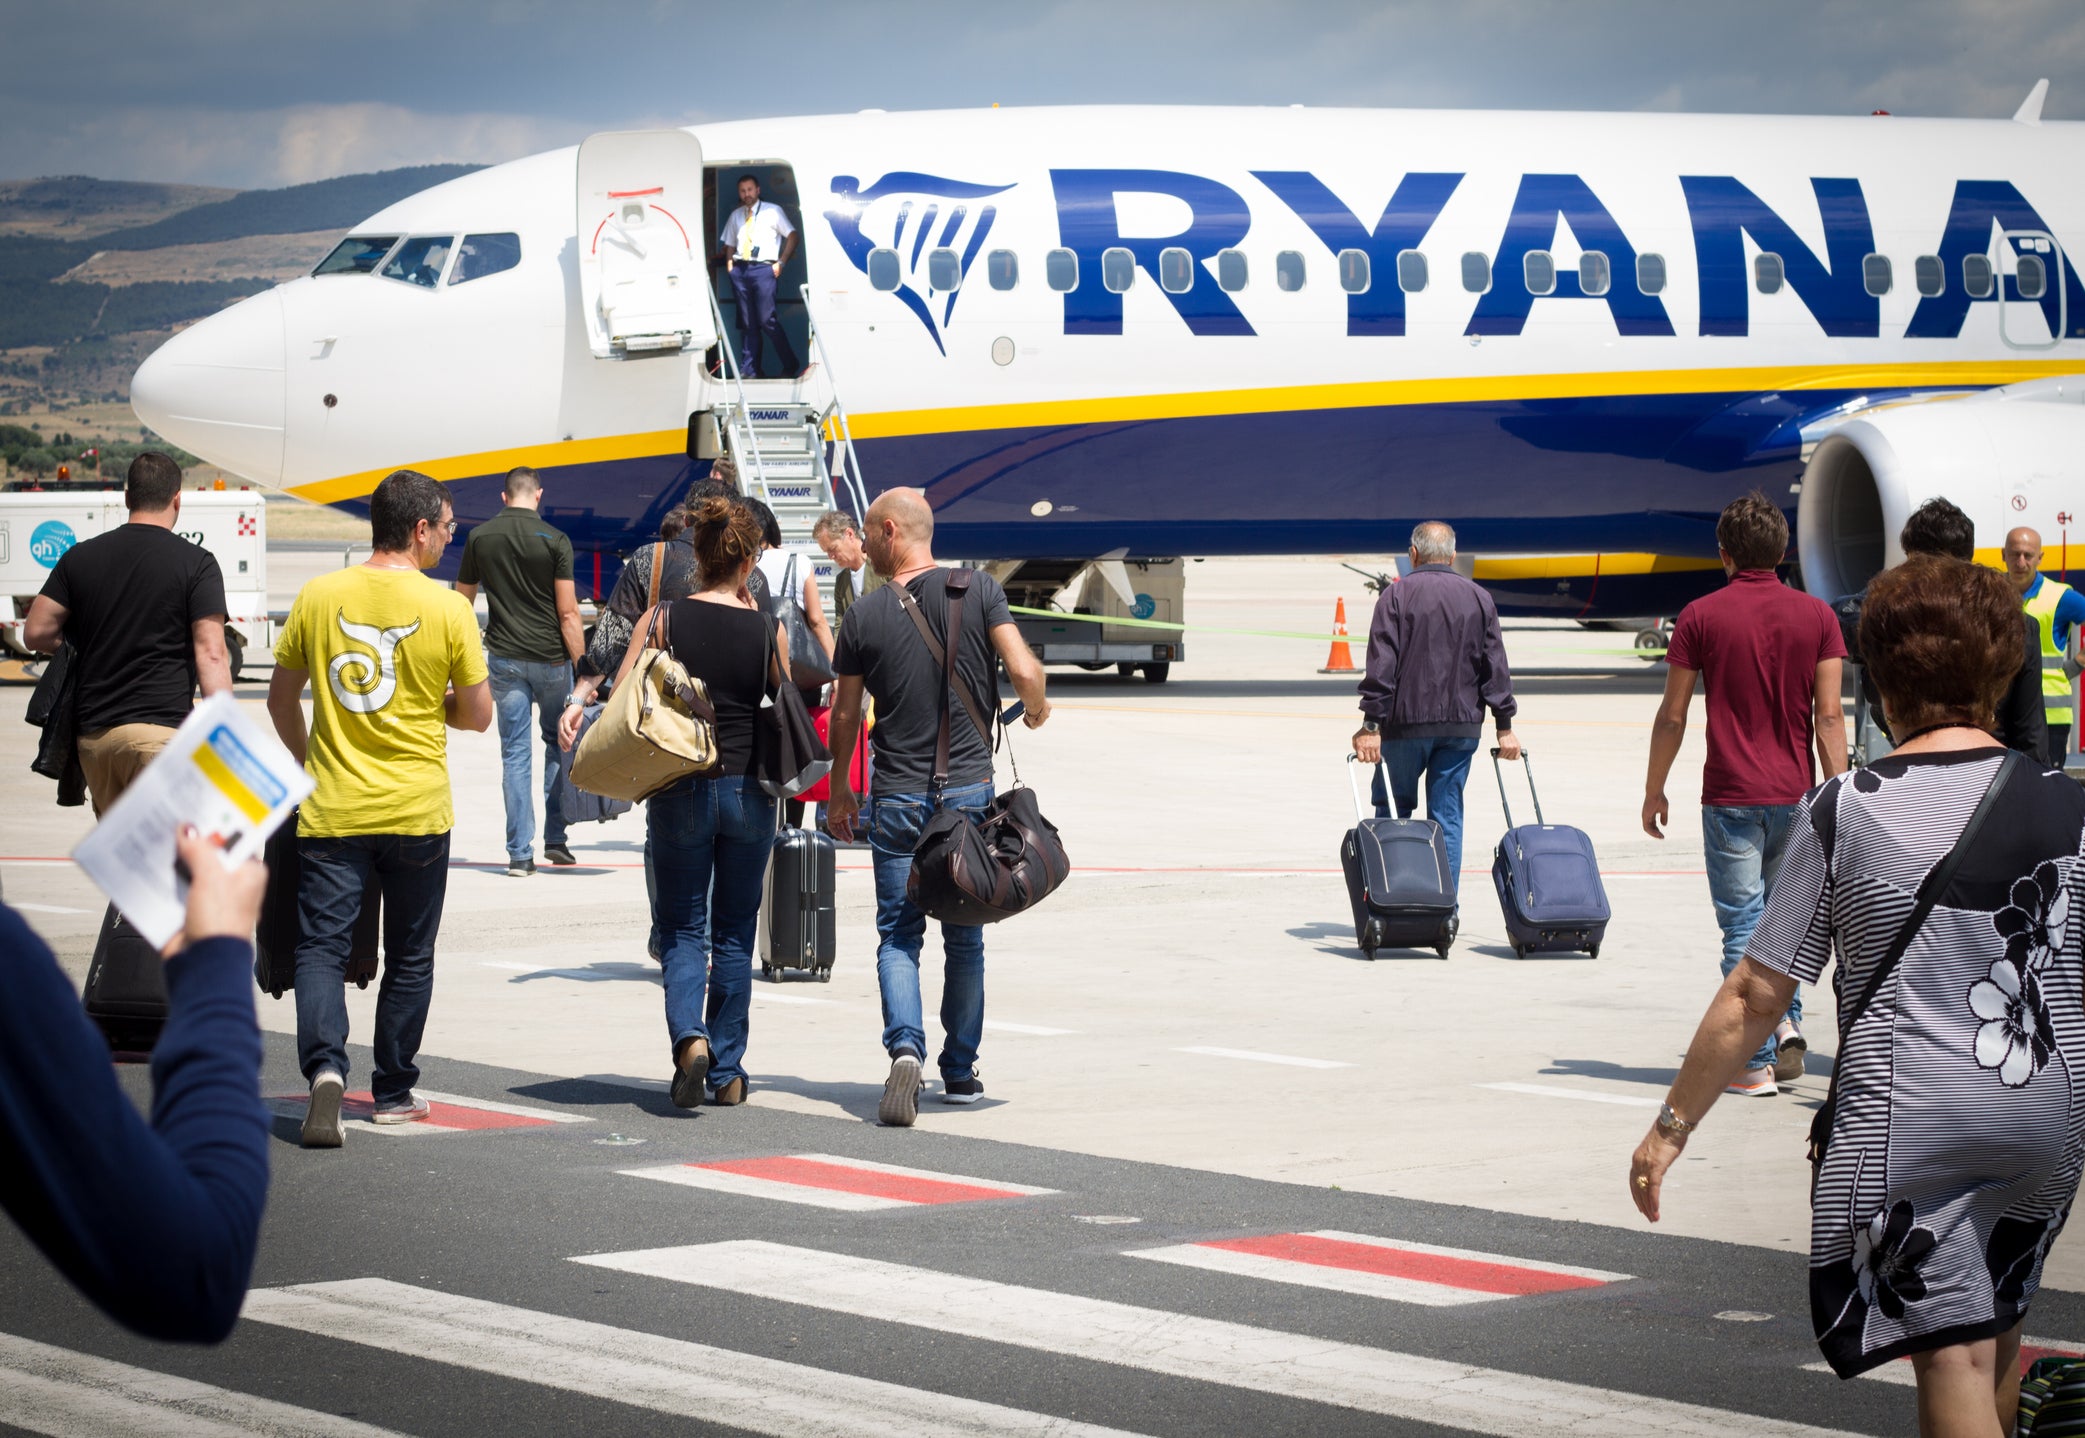 Fights broke out on two Ryanair flights from Edinburgh to Tenerife last month